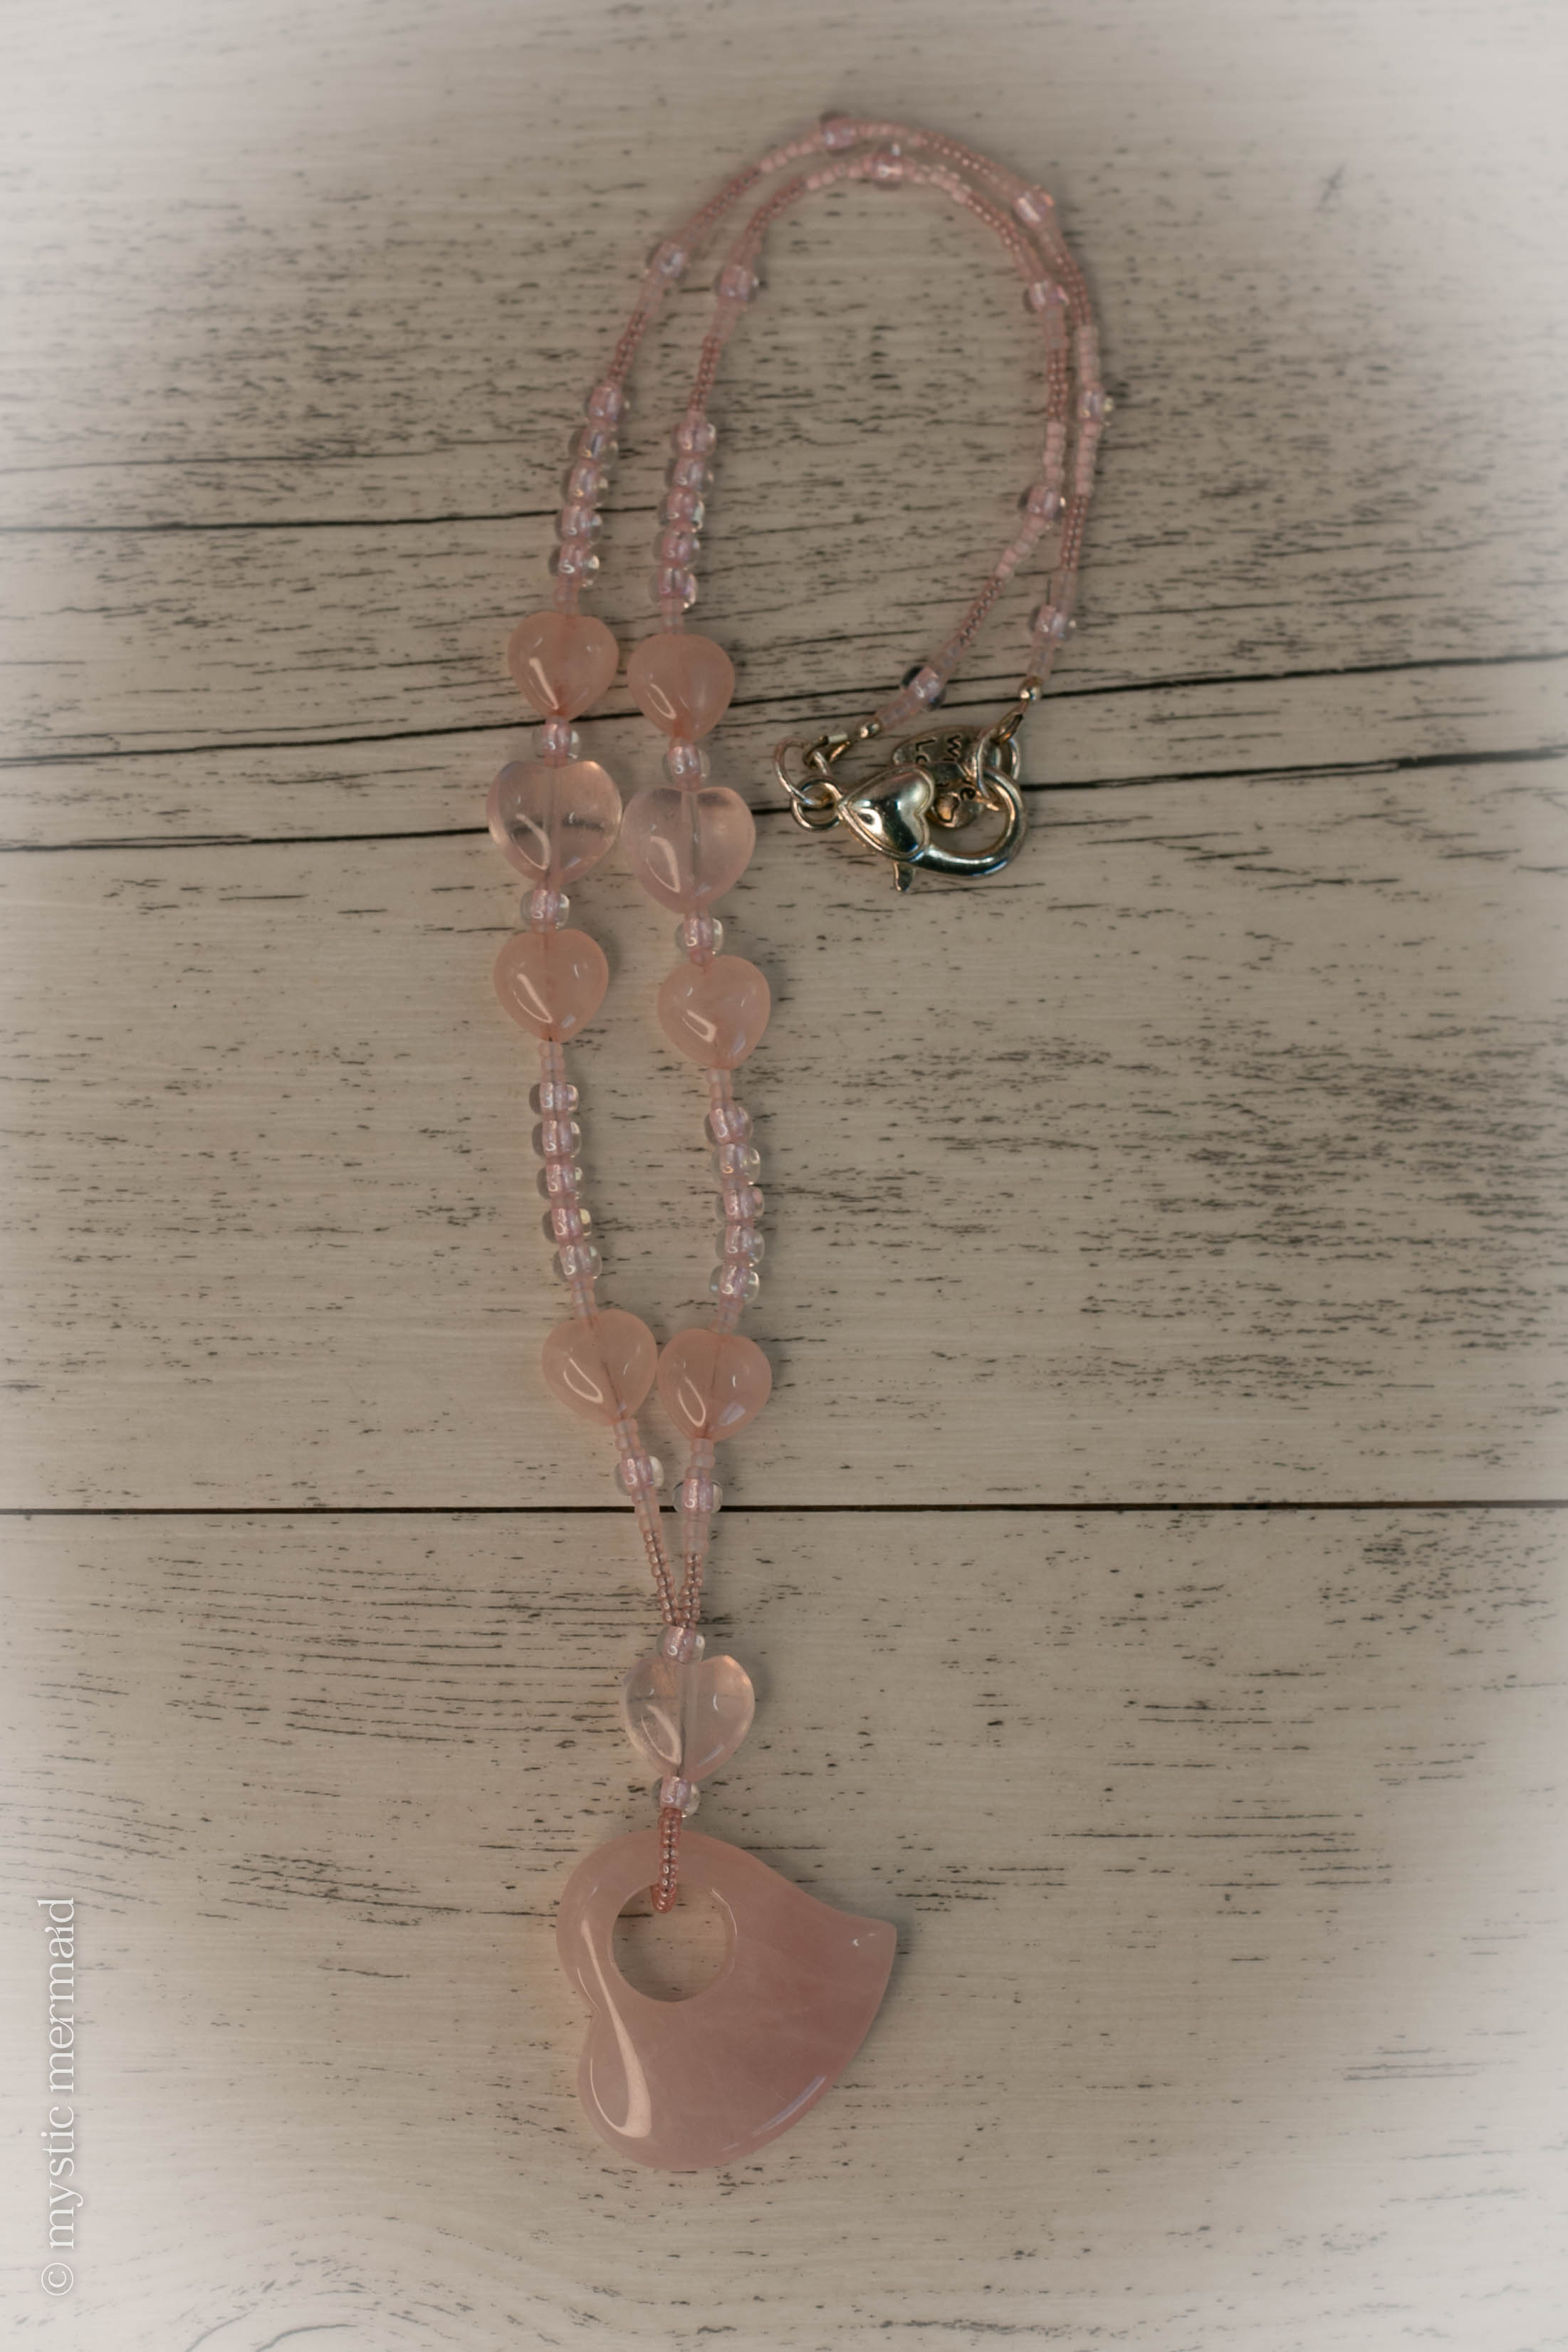 It's All About the Love - Floating Rose Quartz Heart Necklace